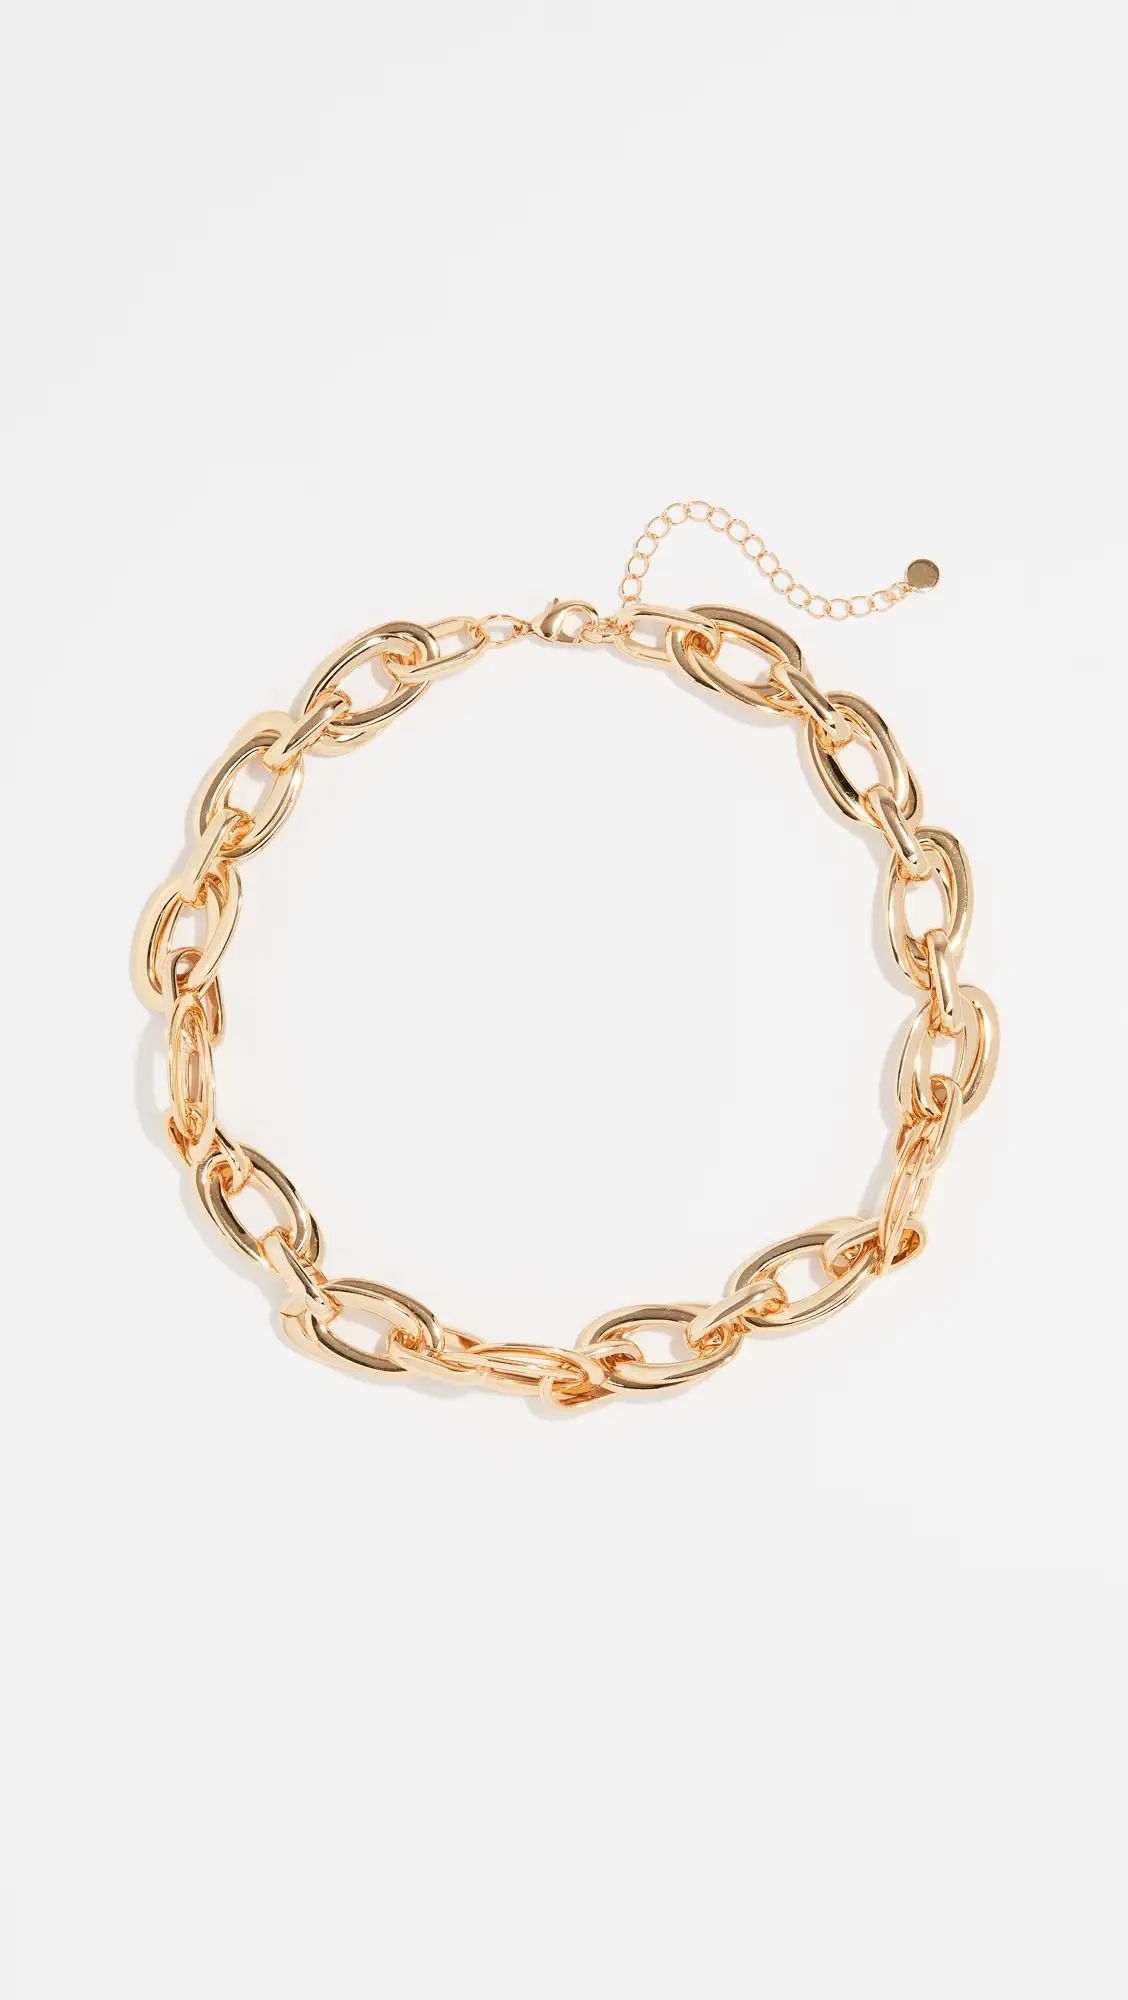 Jules Smith In Chains Necklace | Shopbop | Shopbop